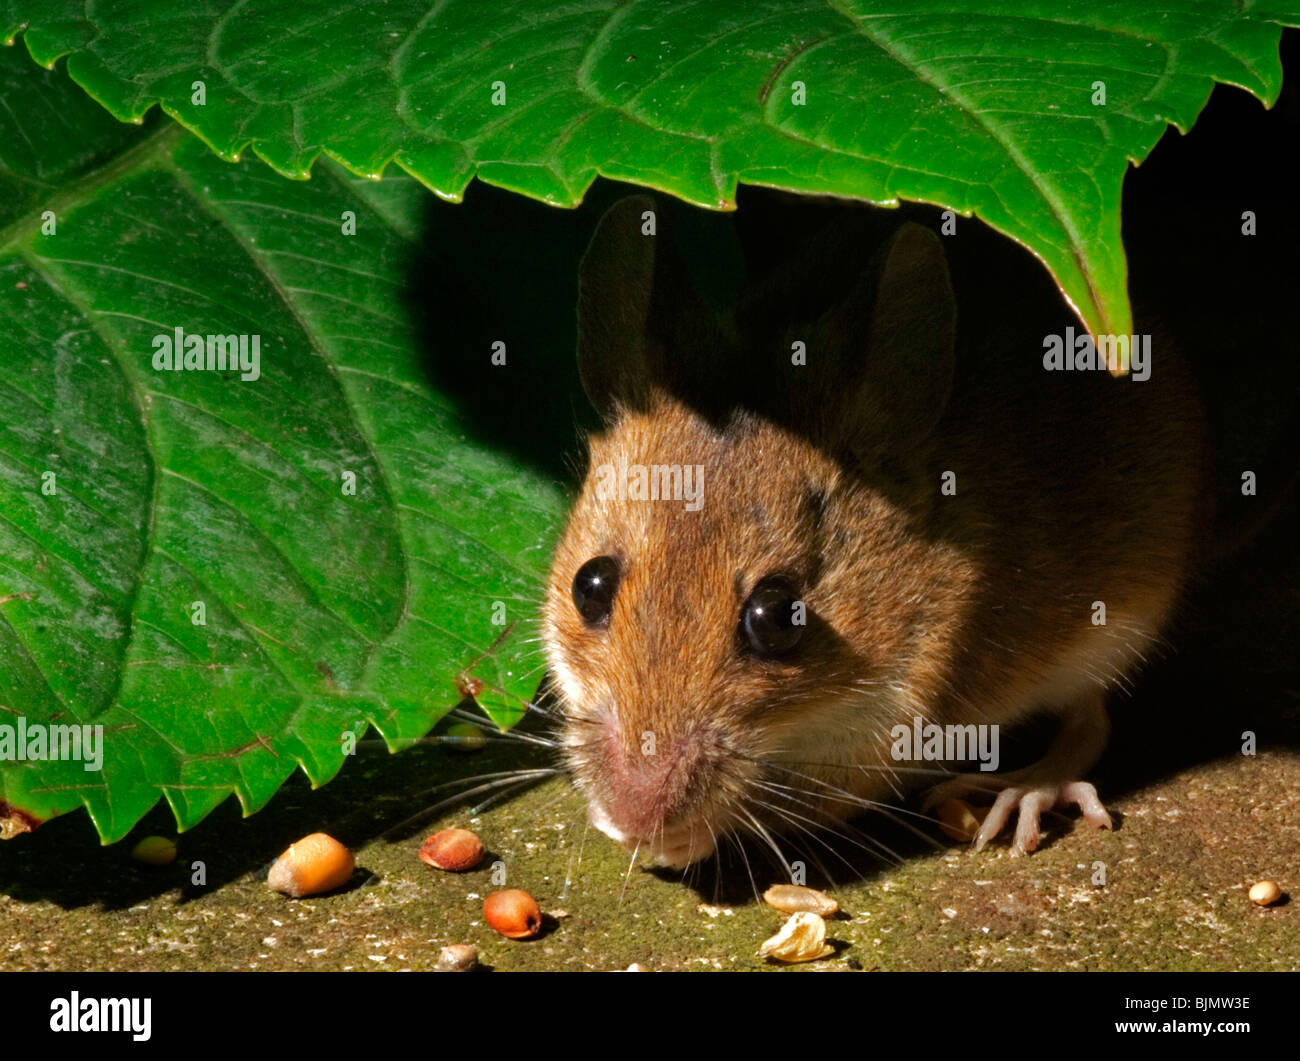 Wood Mouse (apodemus sylvaticus) eating seeds under leaves in a city garden Stock Photo